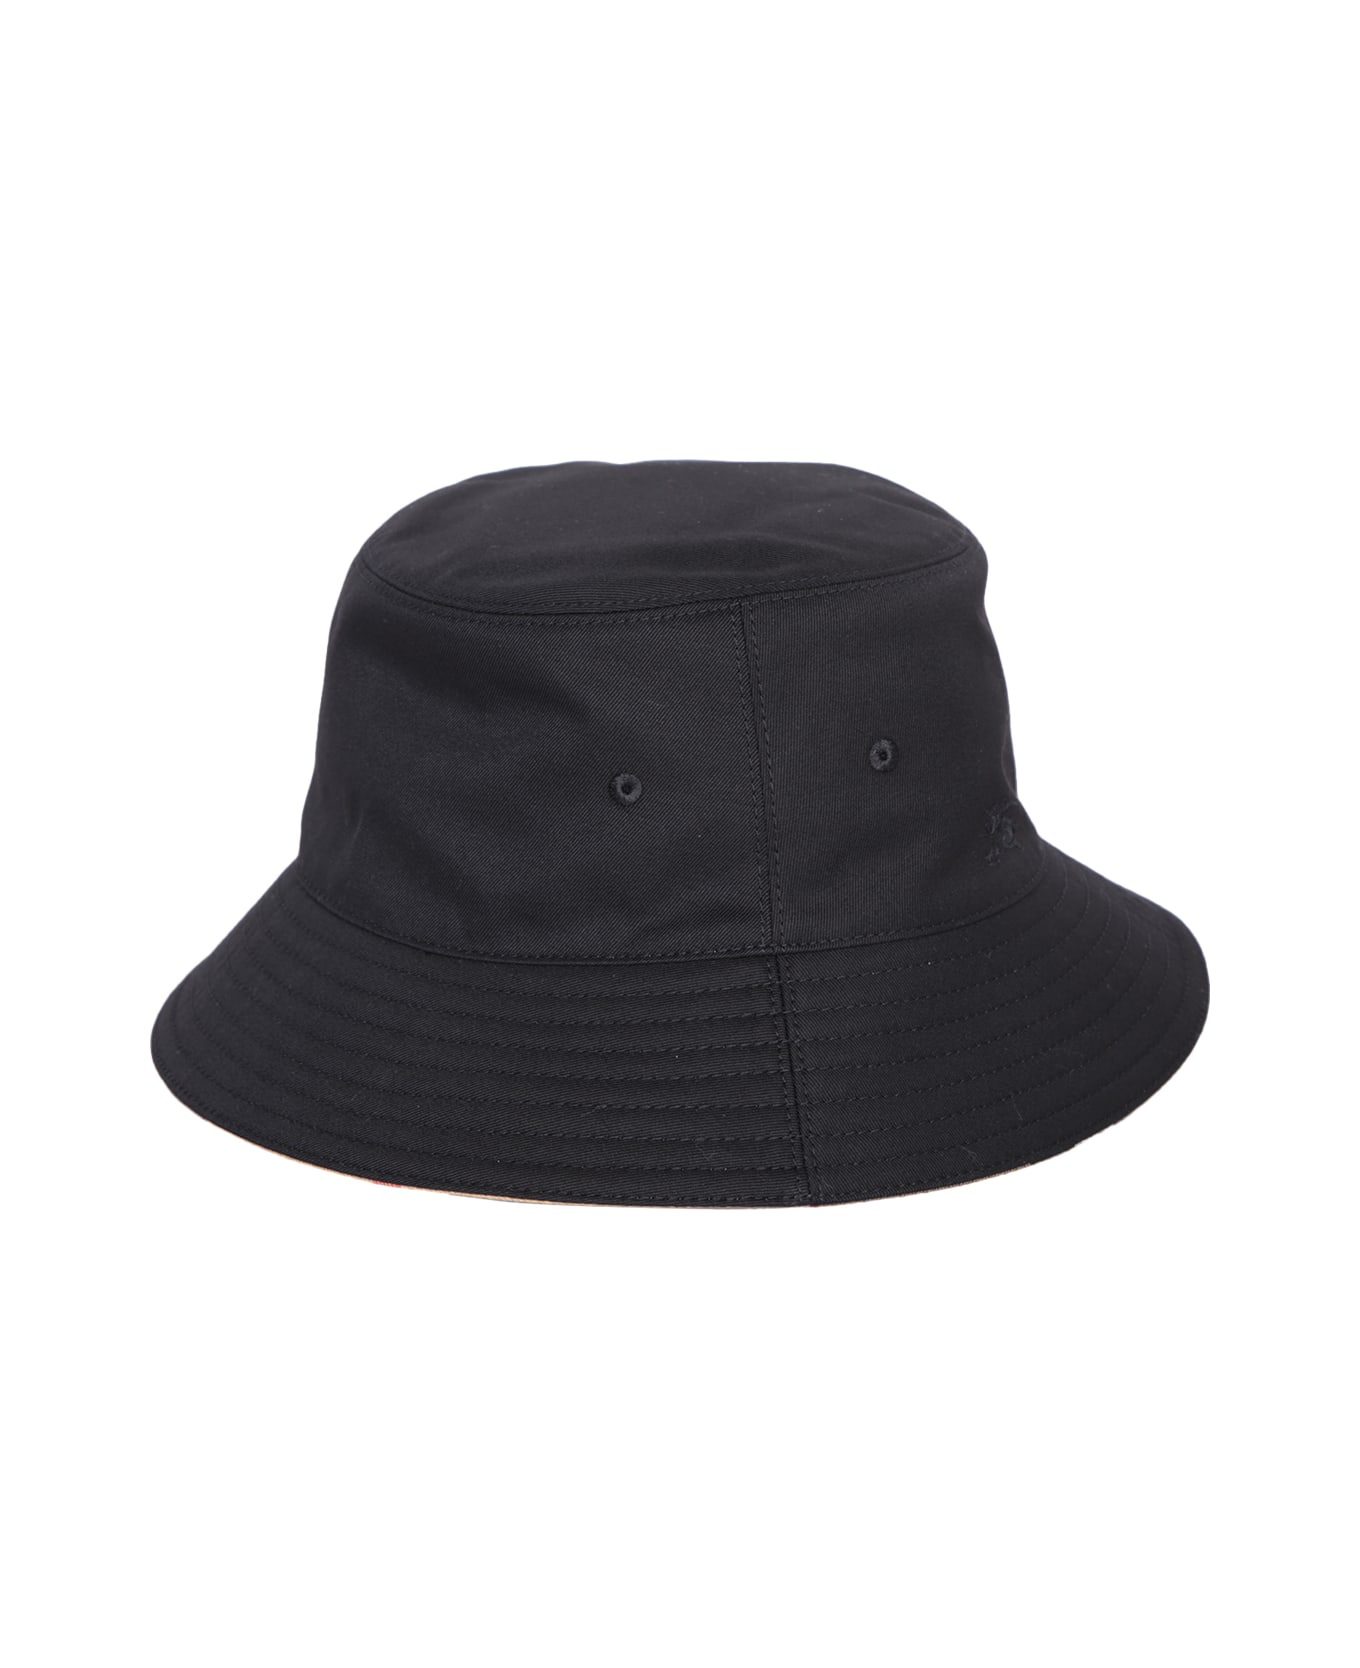 Burberry Checked Reversible Bucket Hat - Black